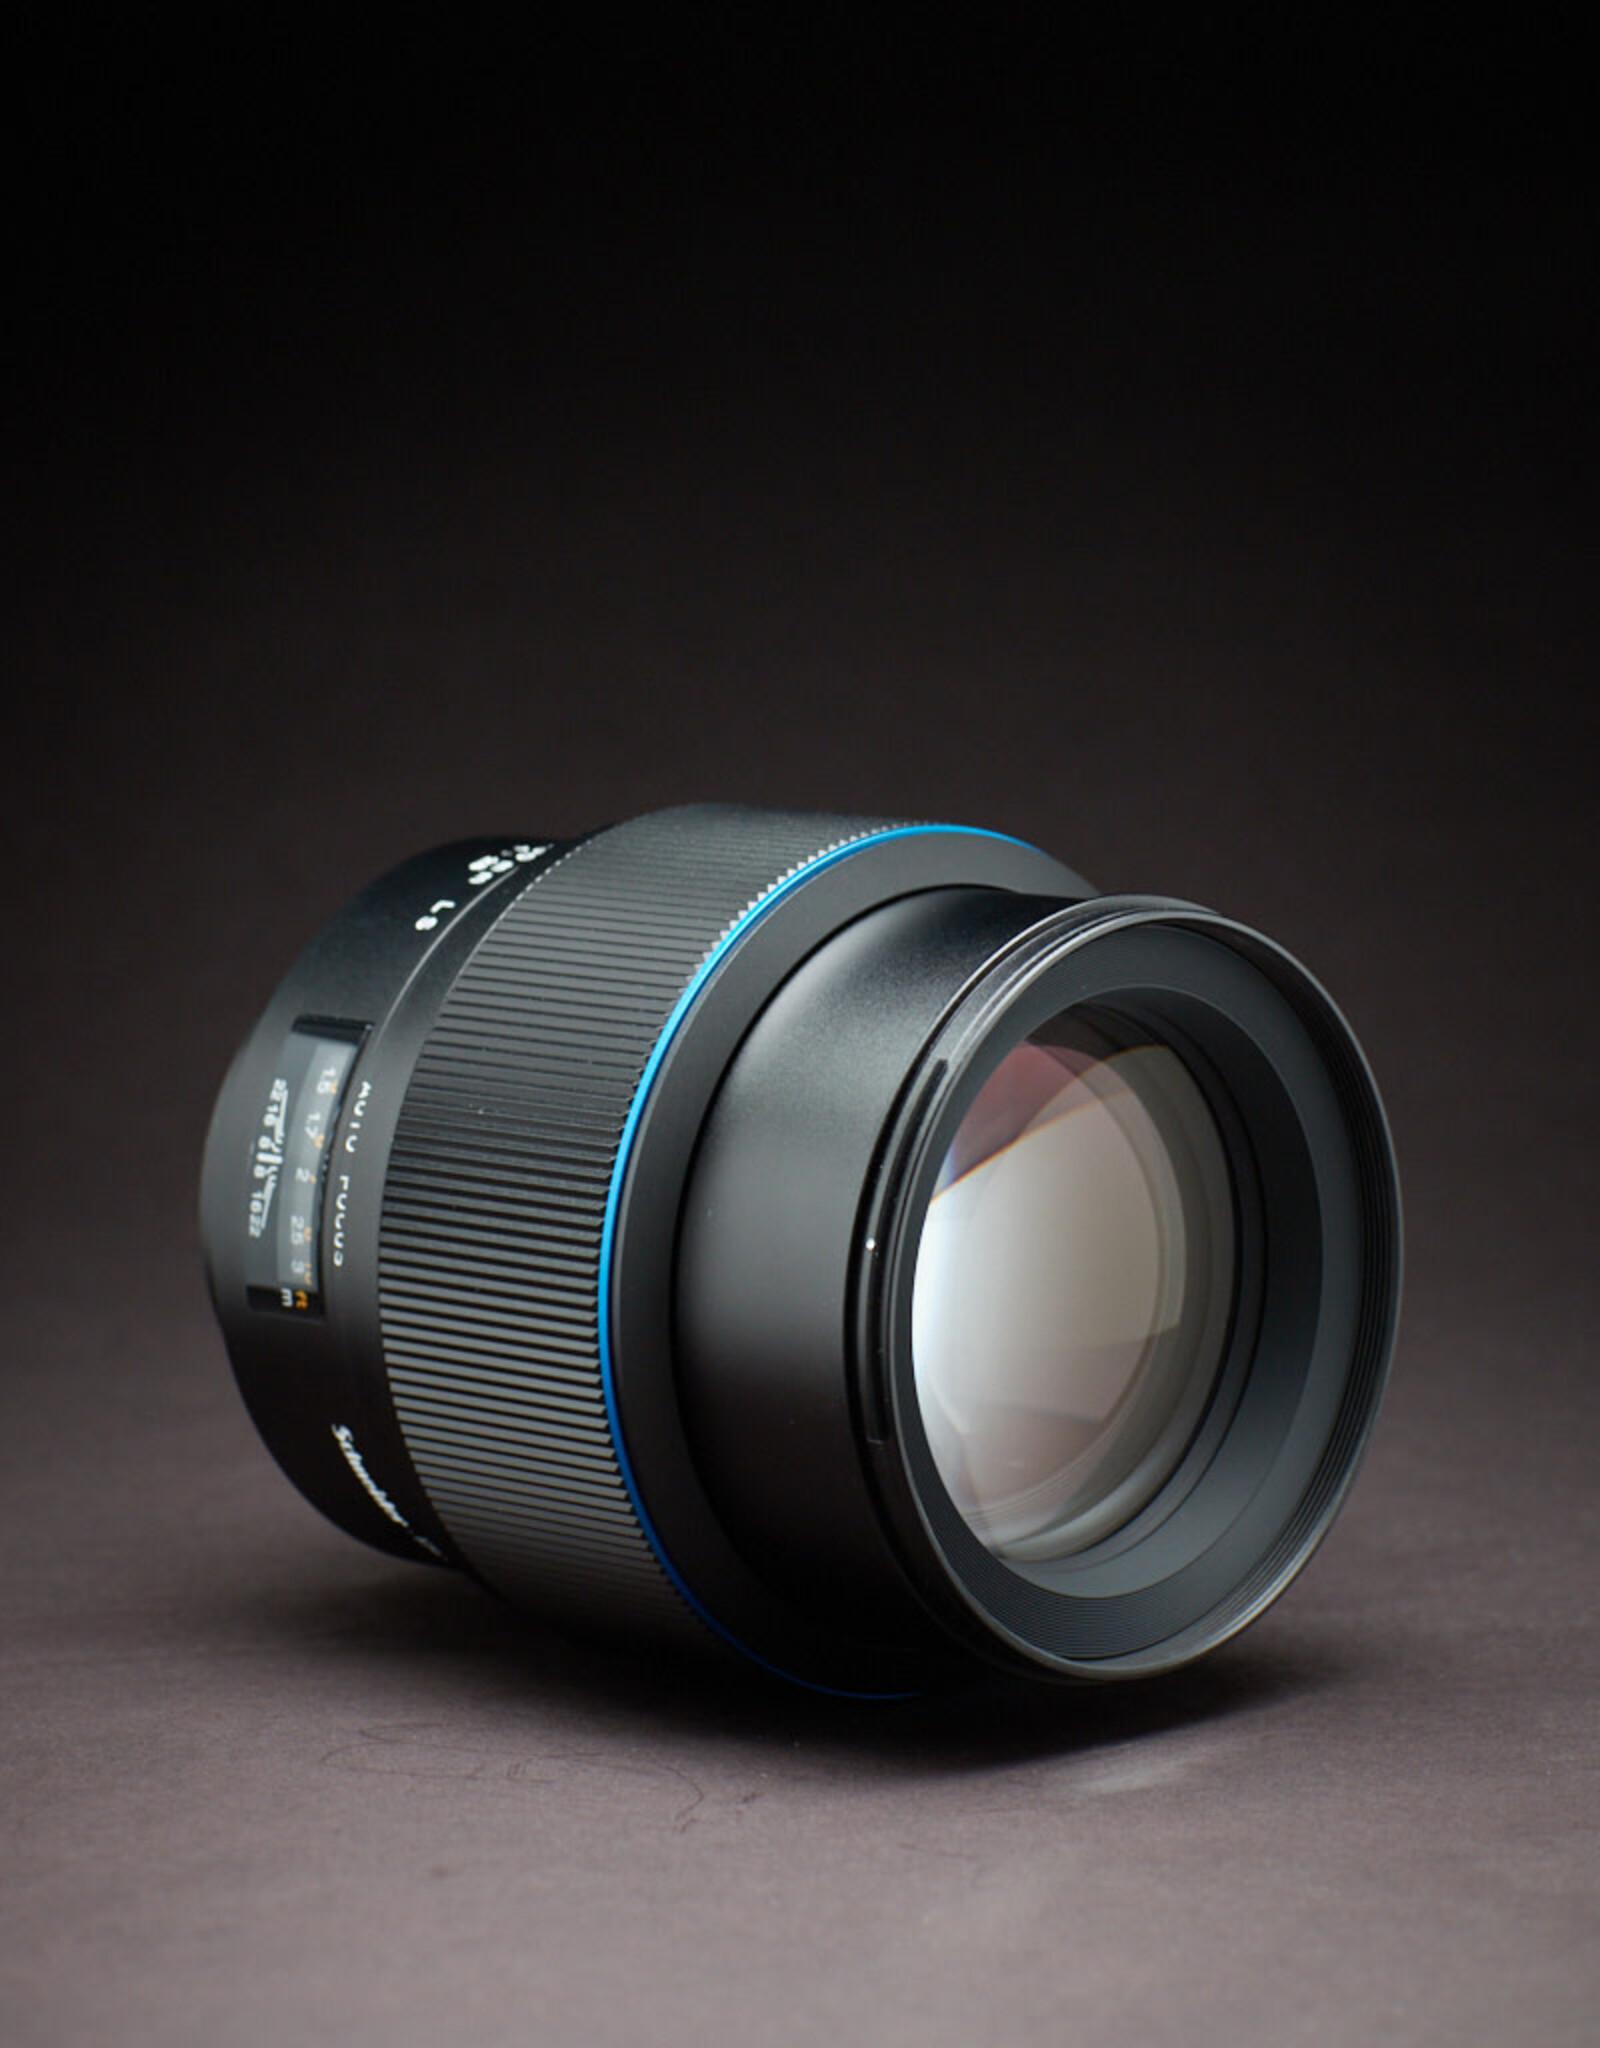 Phase One USED - Phase One Schneider Kreuznach 150mm 2.8 Blue Ring Lens with hood, caps and original box. Condition 9.5.